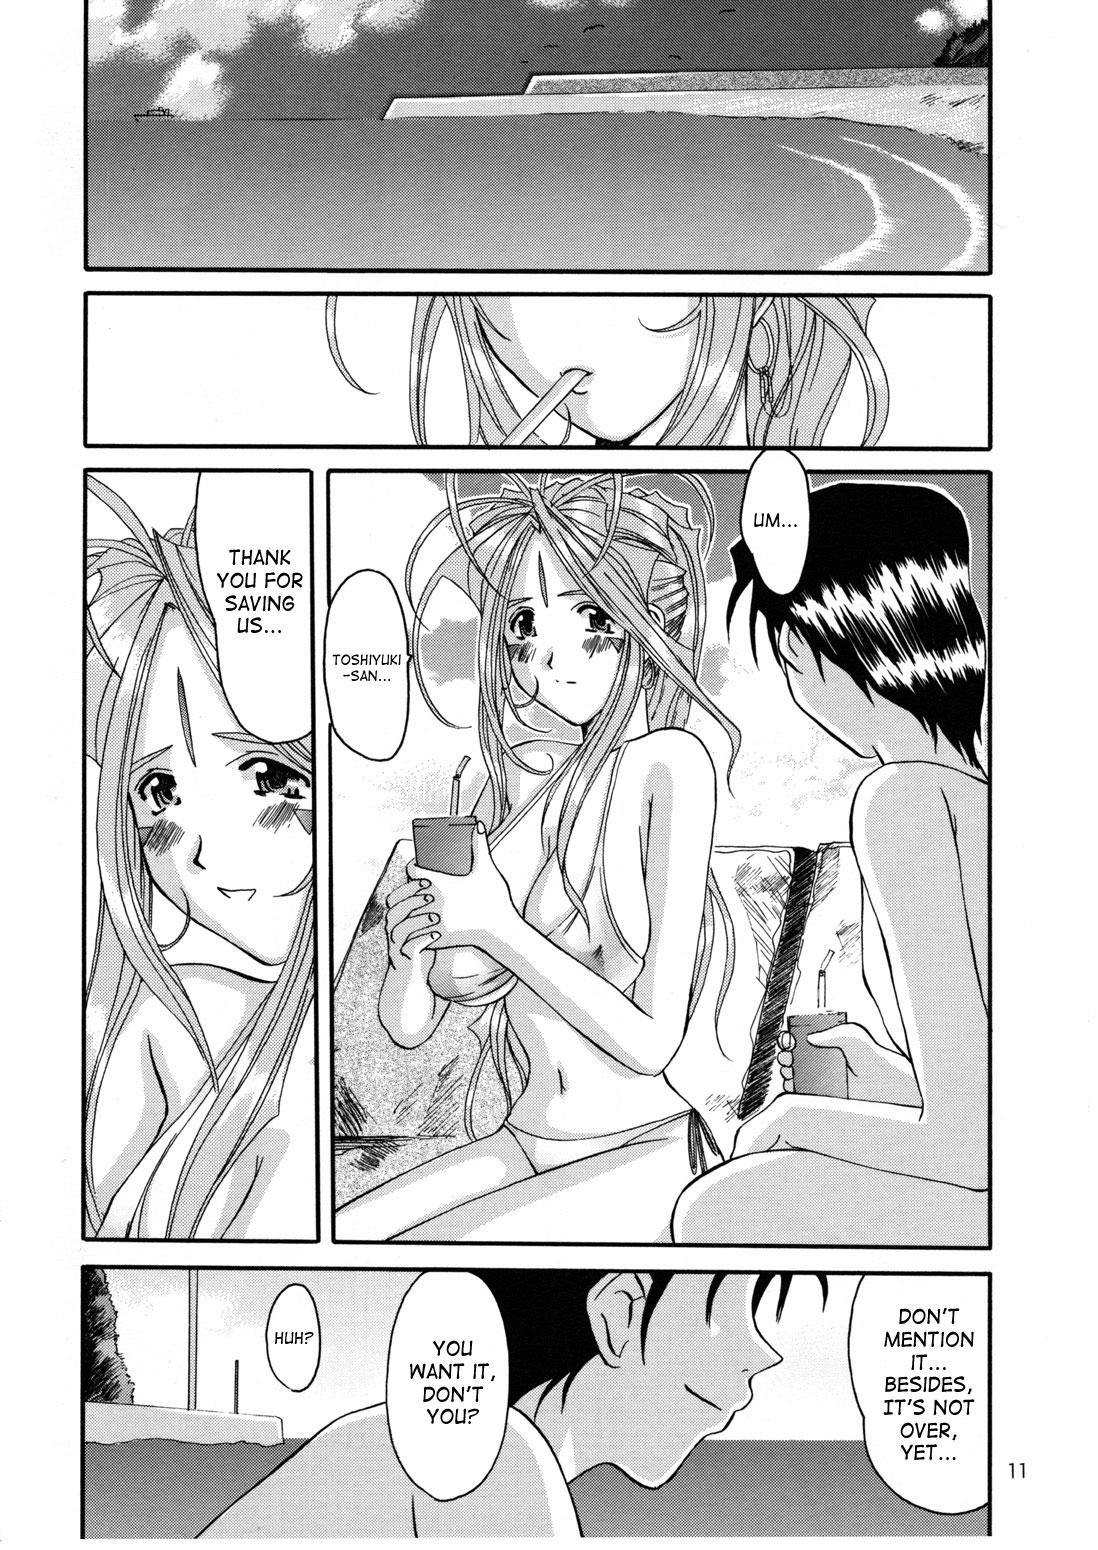 Spoon Nightmare of My Goddess Summer Interval - Ah my goddess 18 Year Old - Page 10